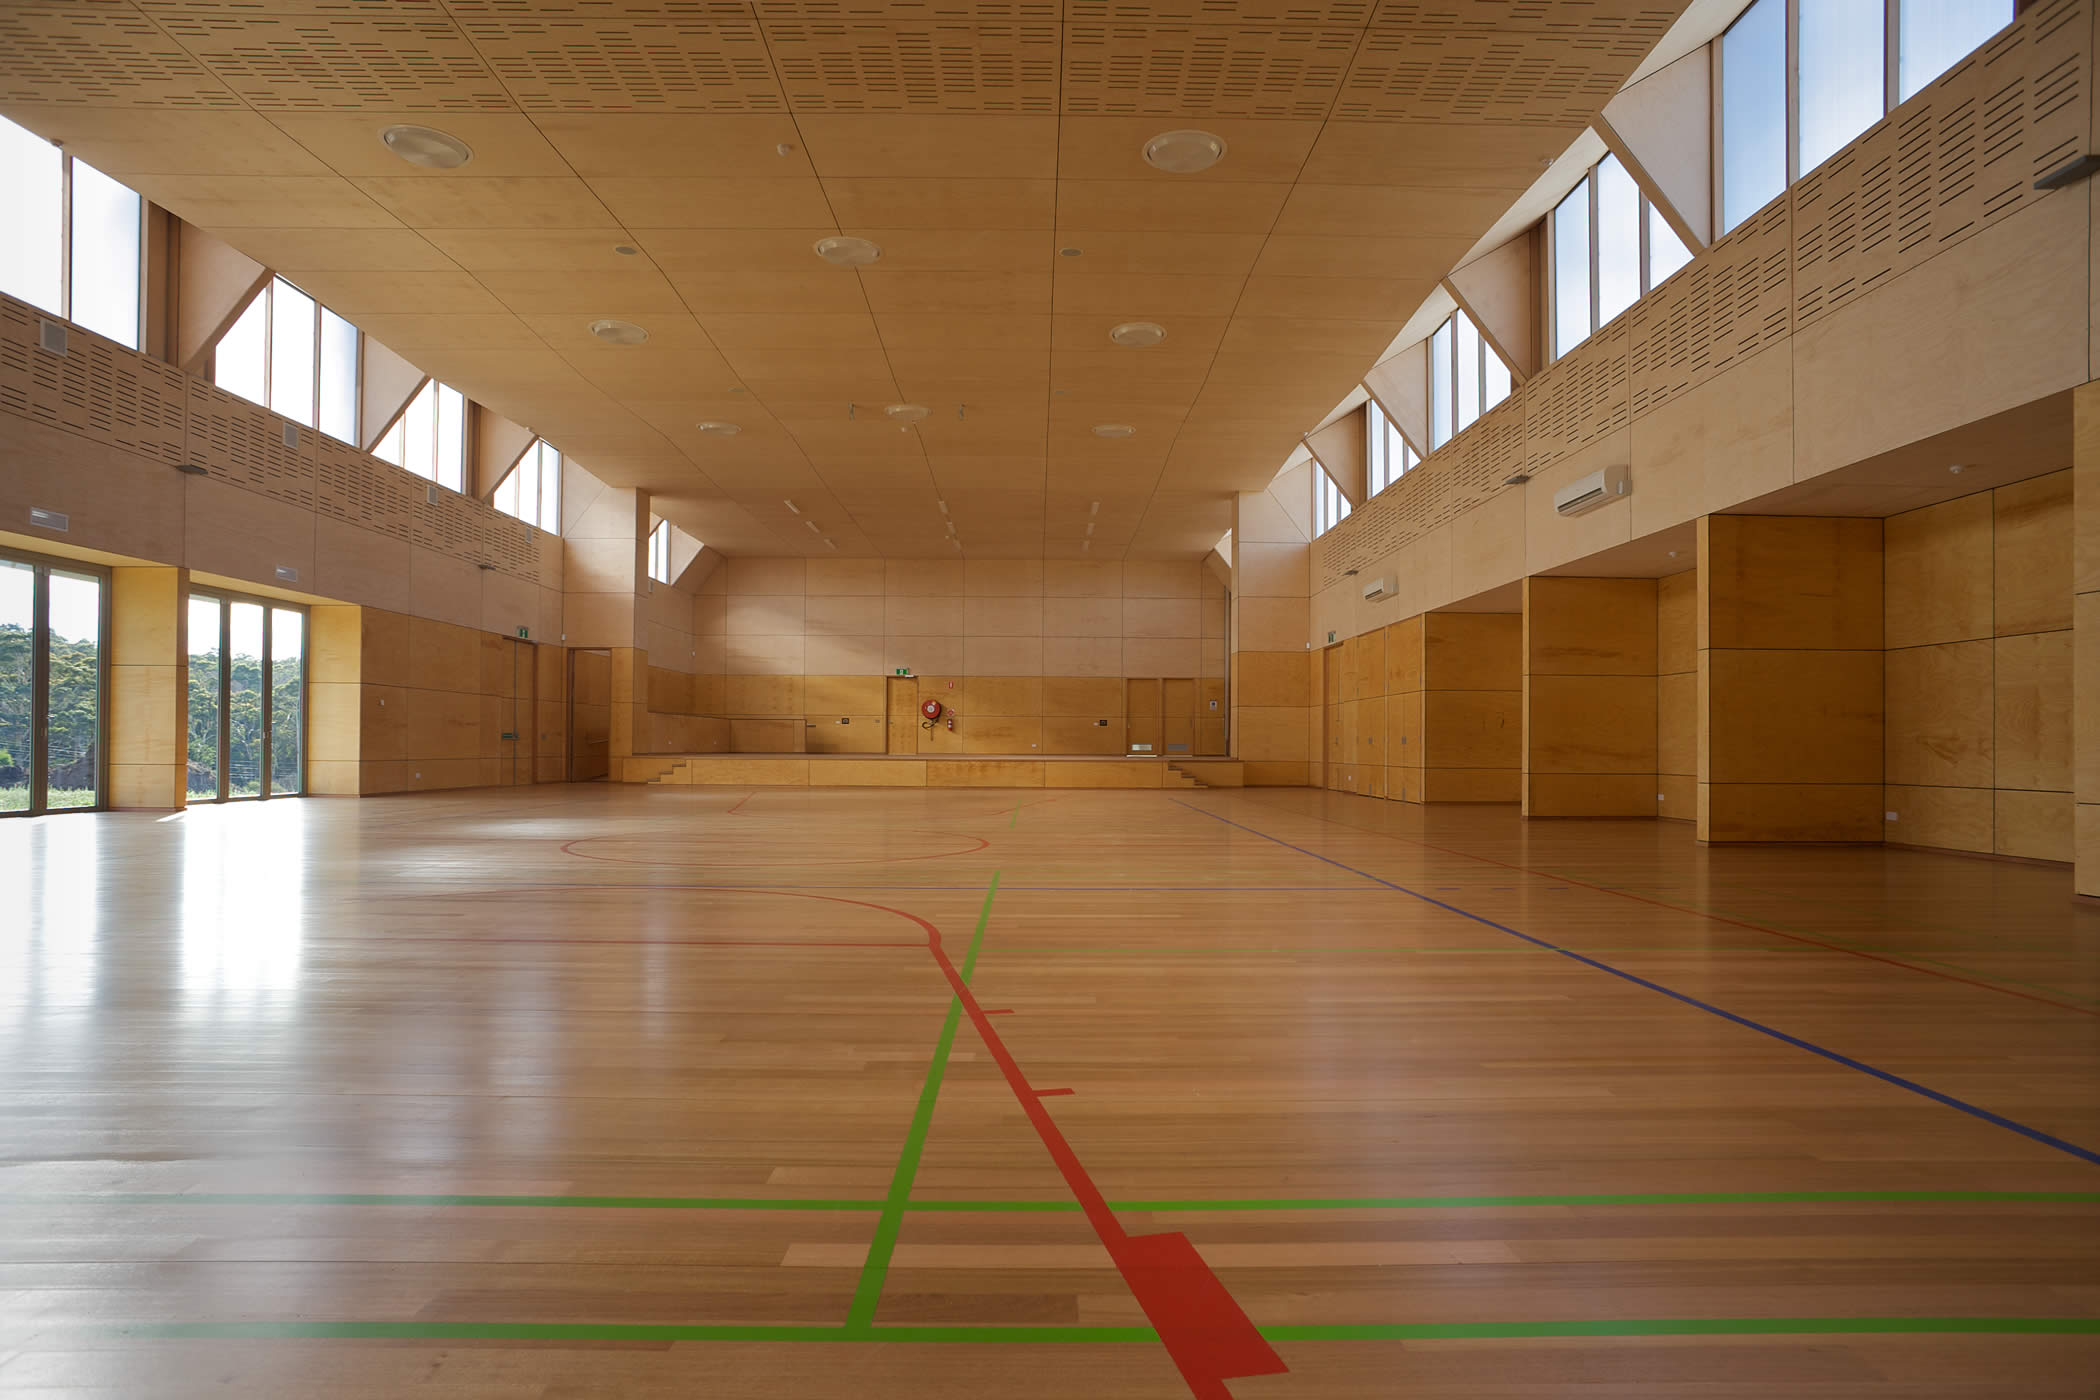 Tarremah School Hall, Kingston, Tasmania: The economical carbon sink timber structure achieves large clear spans, and incorporated a sprung timber floor and an acoustically engineered plywood interior for multifunctional use.  Photo by Ray Joyce.